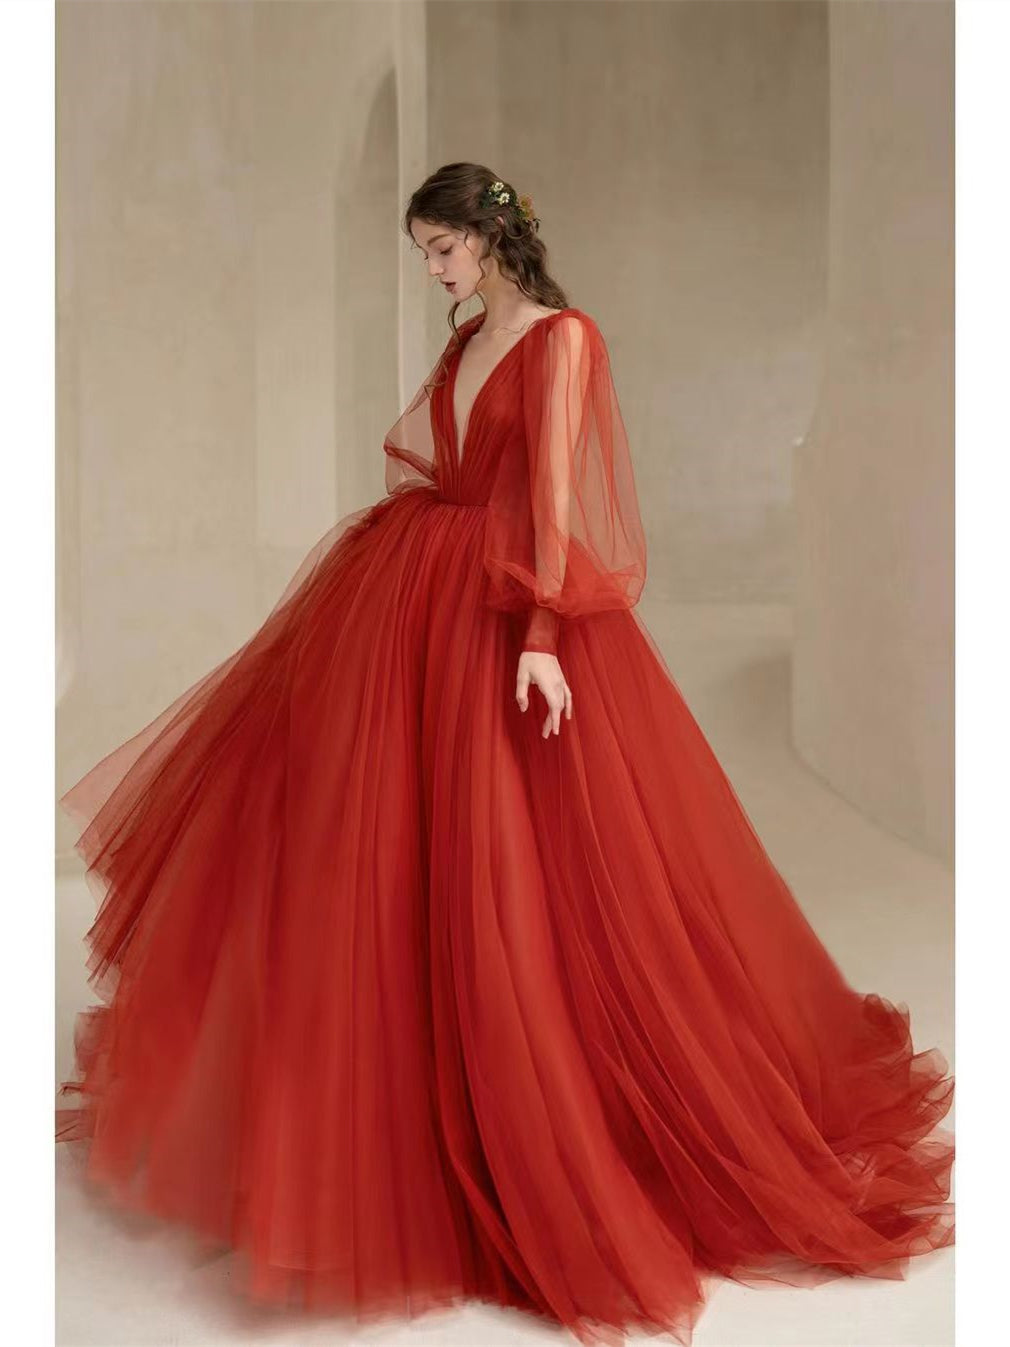 Plunge V-neck Red Tulle Princess Dresses, A-line Prom Dresses, Bubble Sleeves Prom Dresses